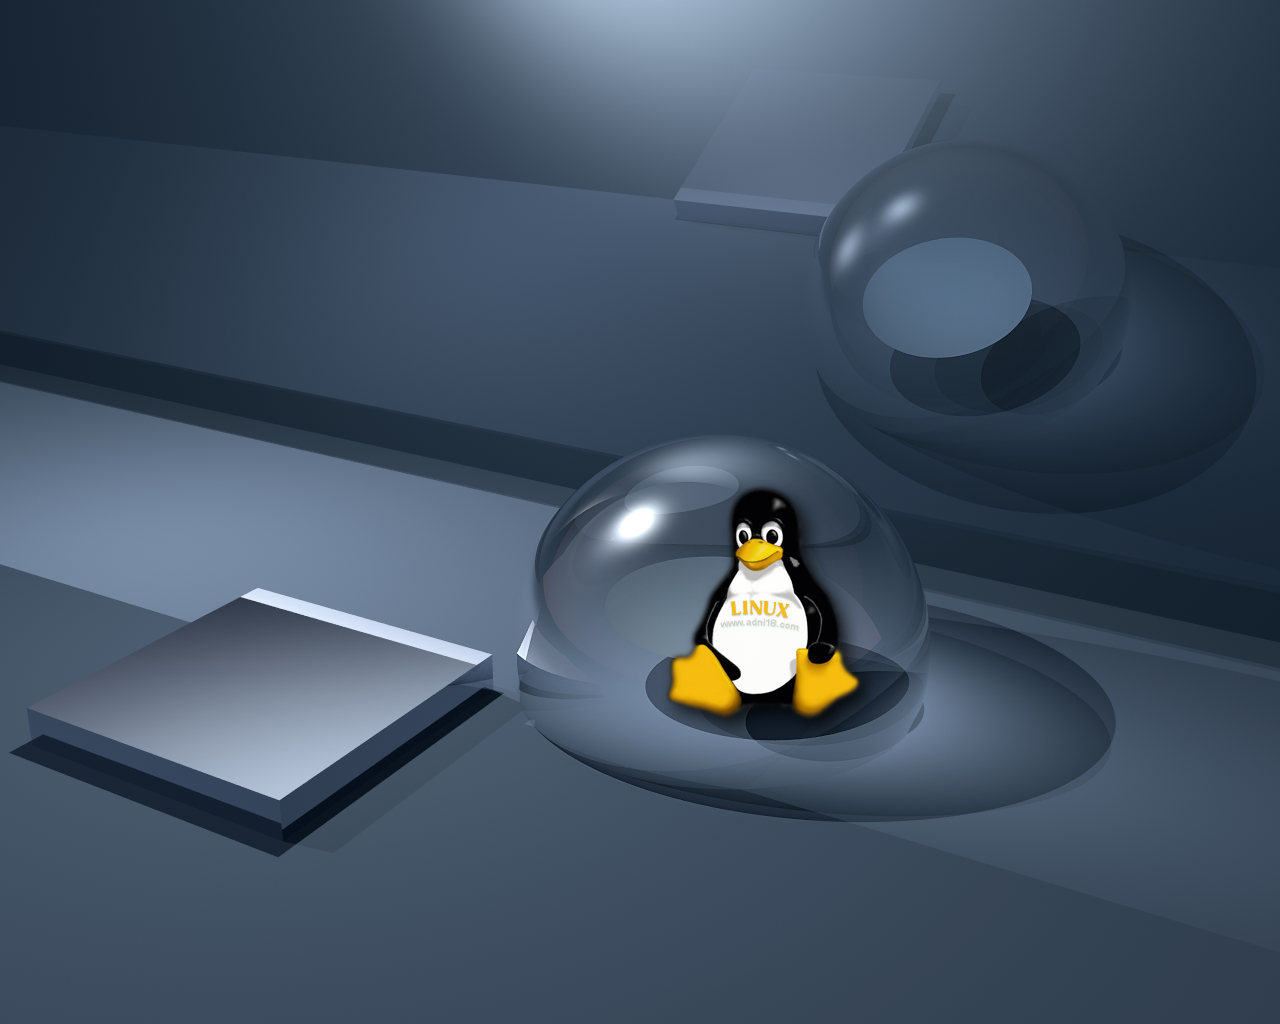  Linux Wallpapers   Linux Stickers and T Shirts 1280x1024